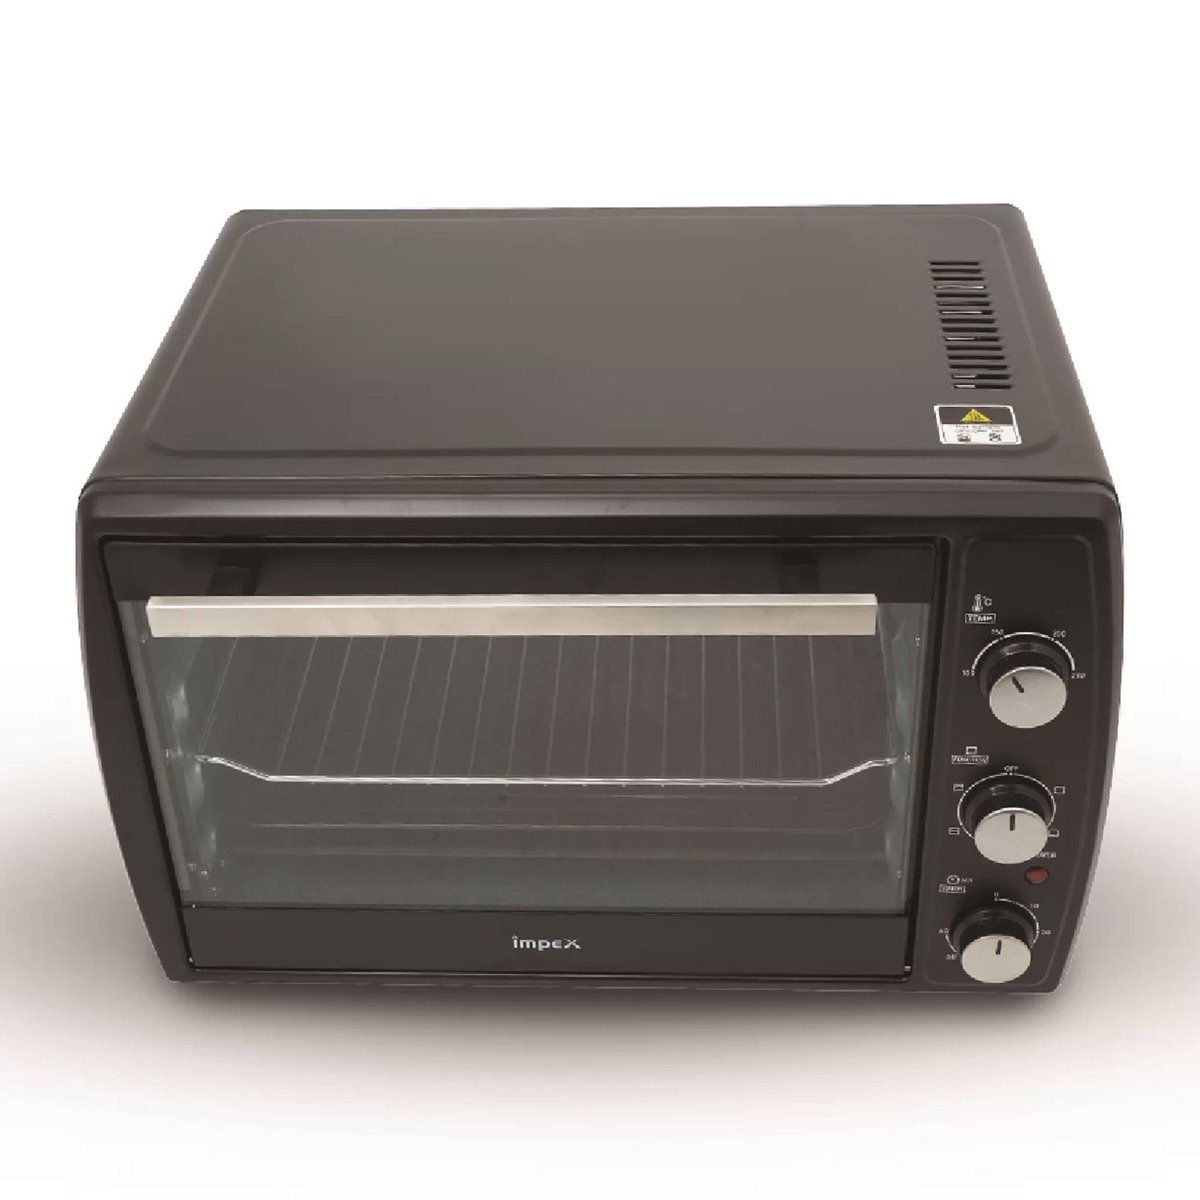 Impex Electric Oven OV2902 45 Ltr